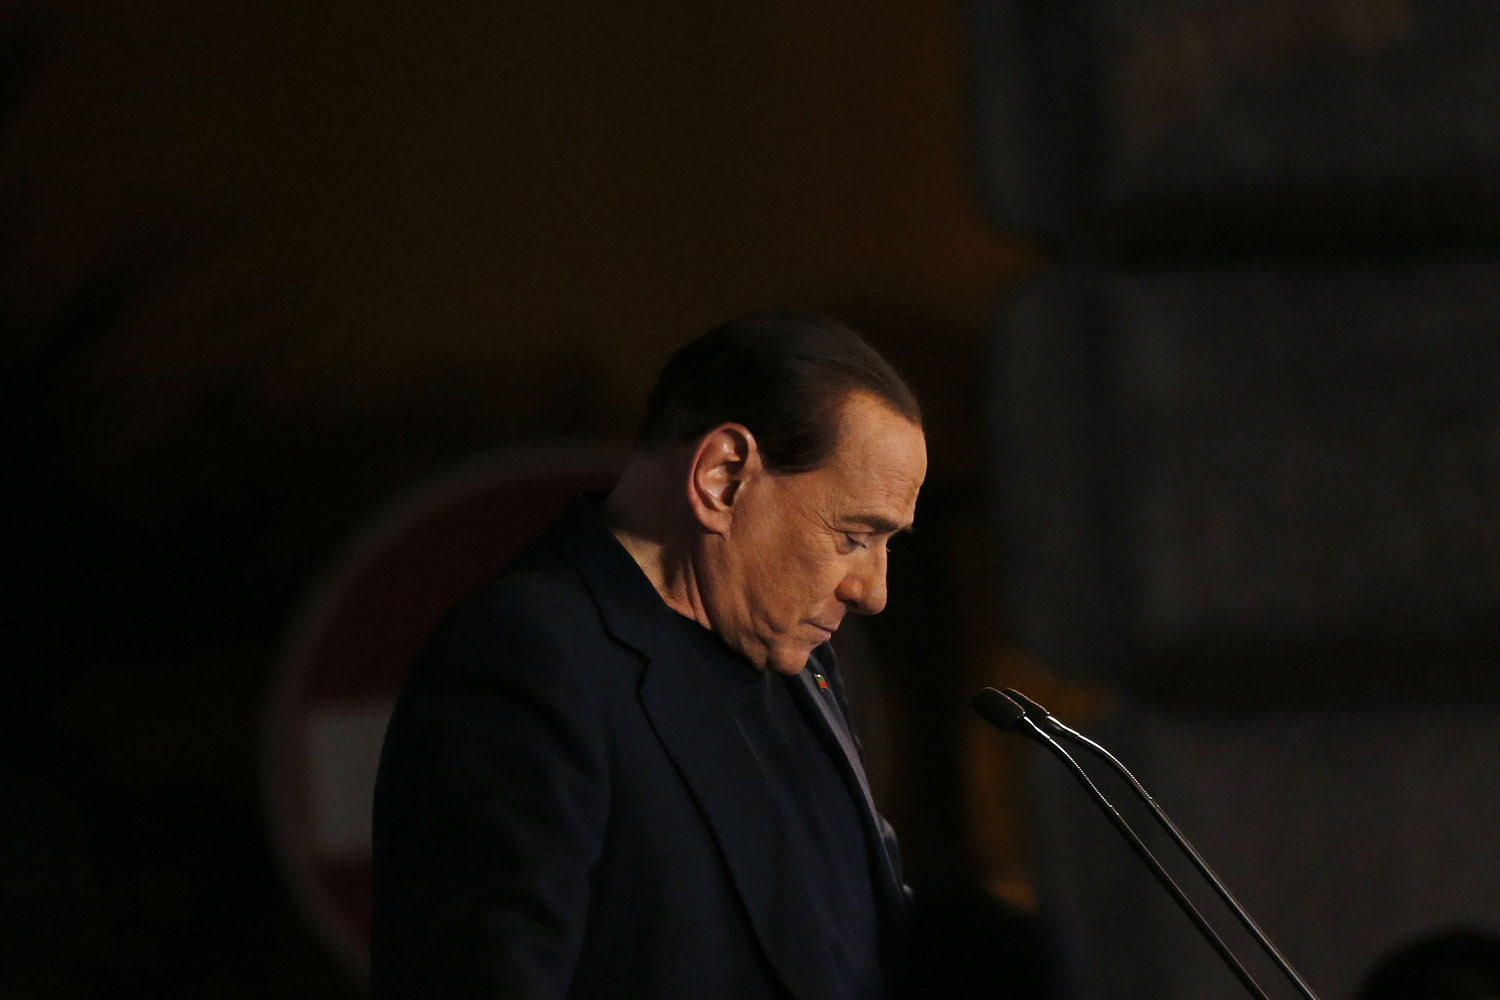 Former Prime Minister Silvio Berlusconi delivers a speech from the stage in downtown Rome